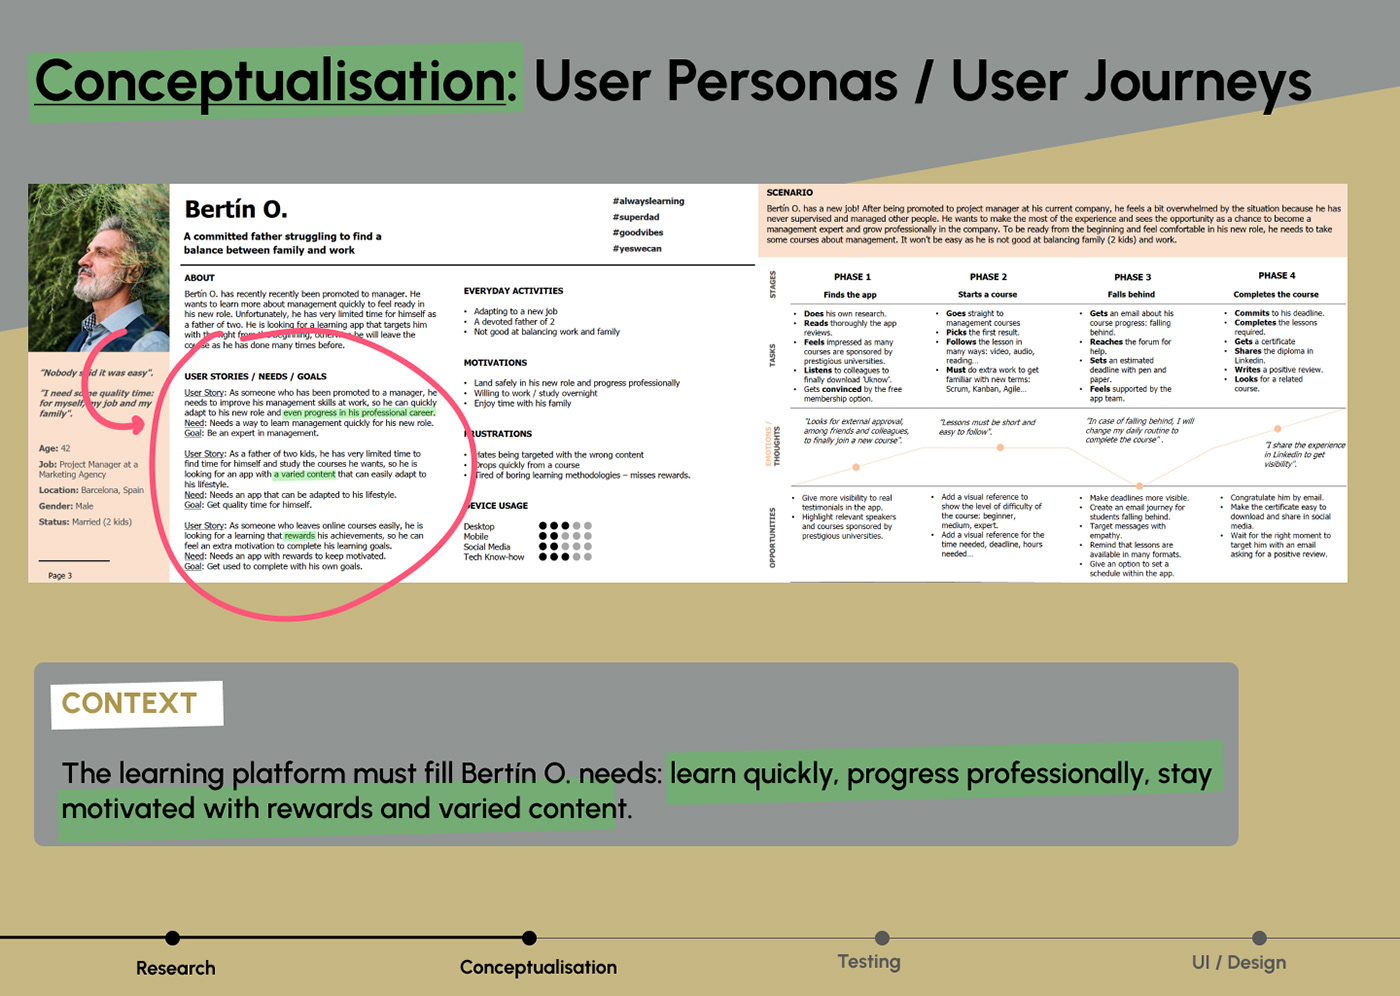 User Personas and User Journeys